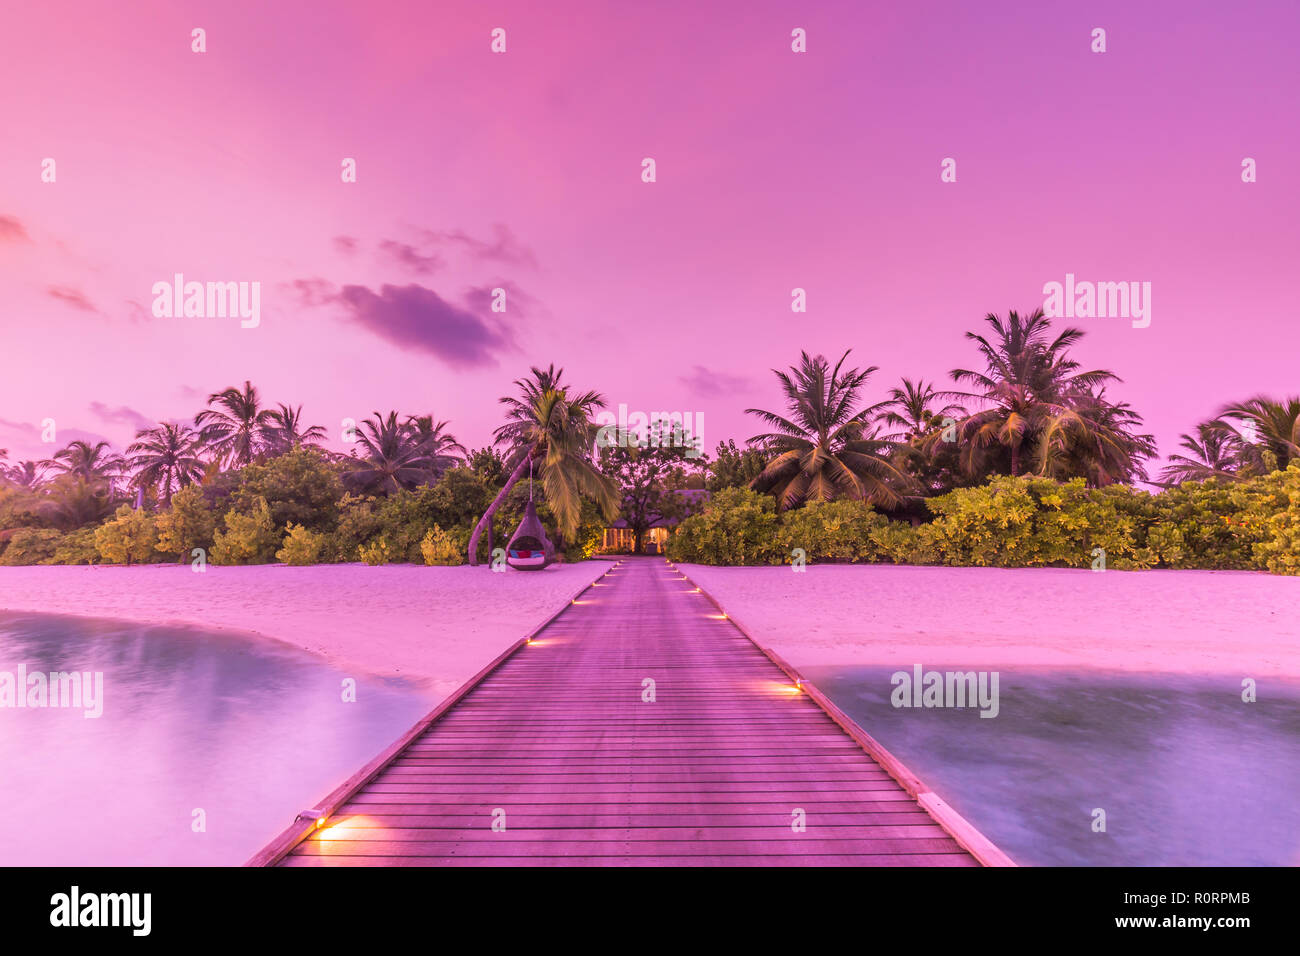 Amazing sunset sky and reflection on calm sea, Maldives beach landscape of luxury over water pier. Exotic scenery of summer vacation and holiday Stock Photo